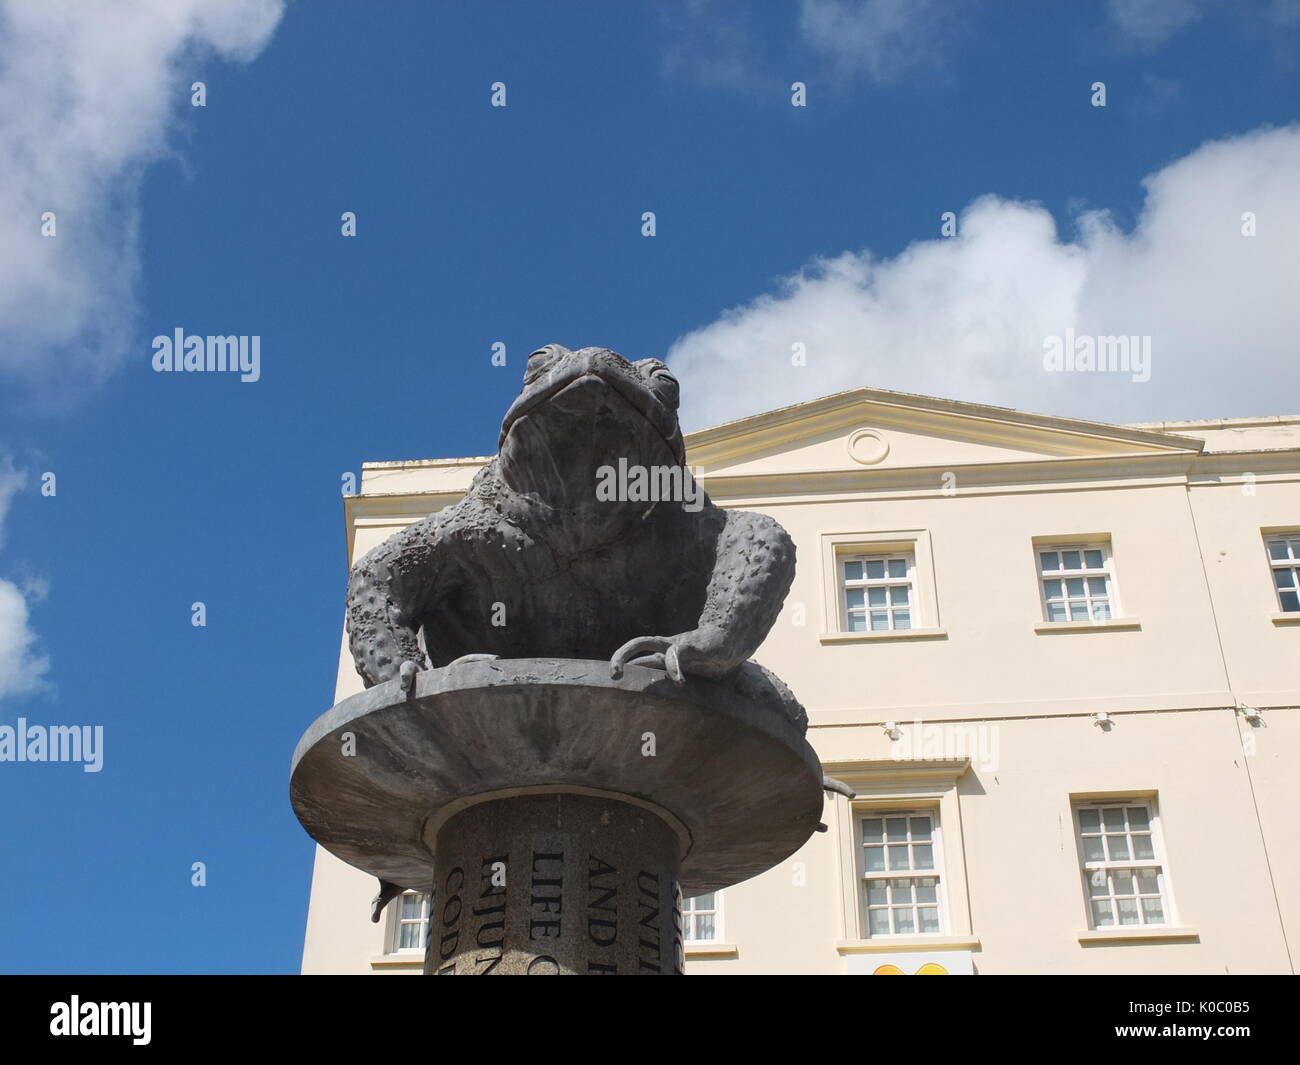 Statue by Gordon Young of crapaud or Jersey toad in St Helier. Jersey people are traditionally known as crapauds by the neighbouring isle of Guernsey. Stock Photo